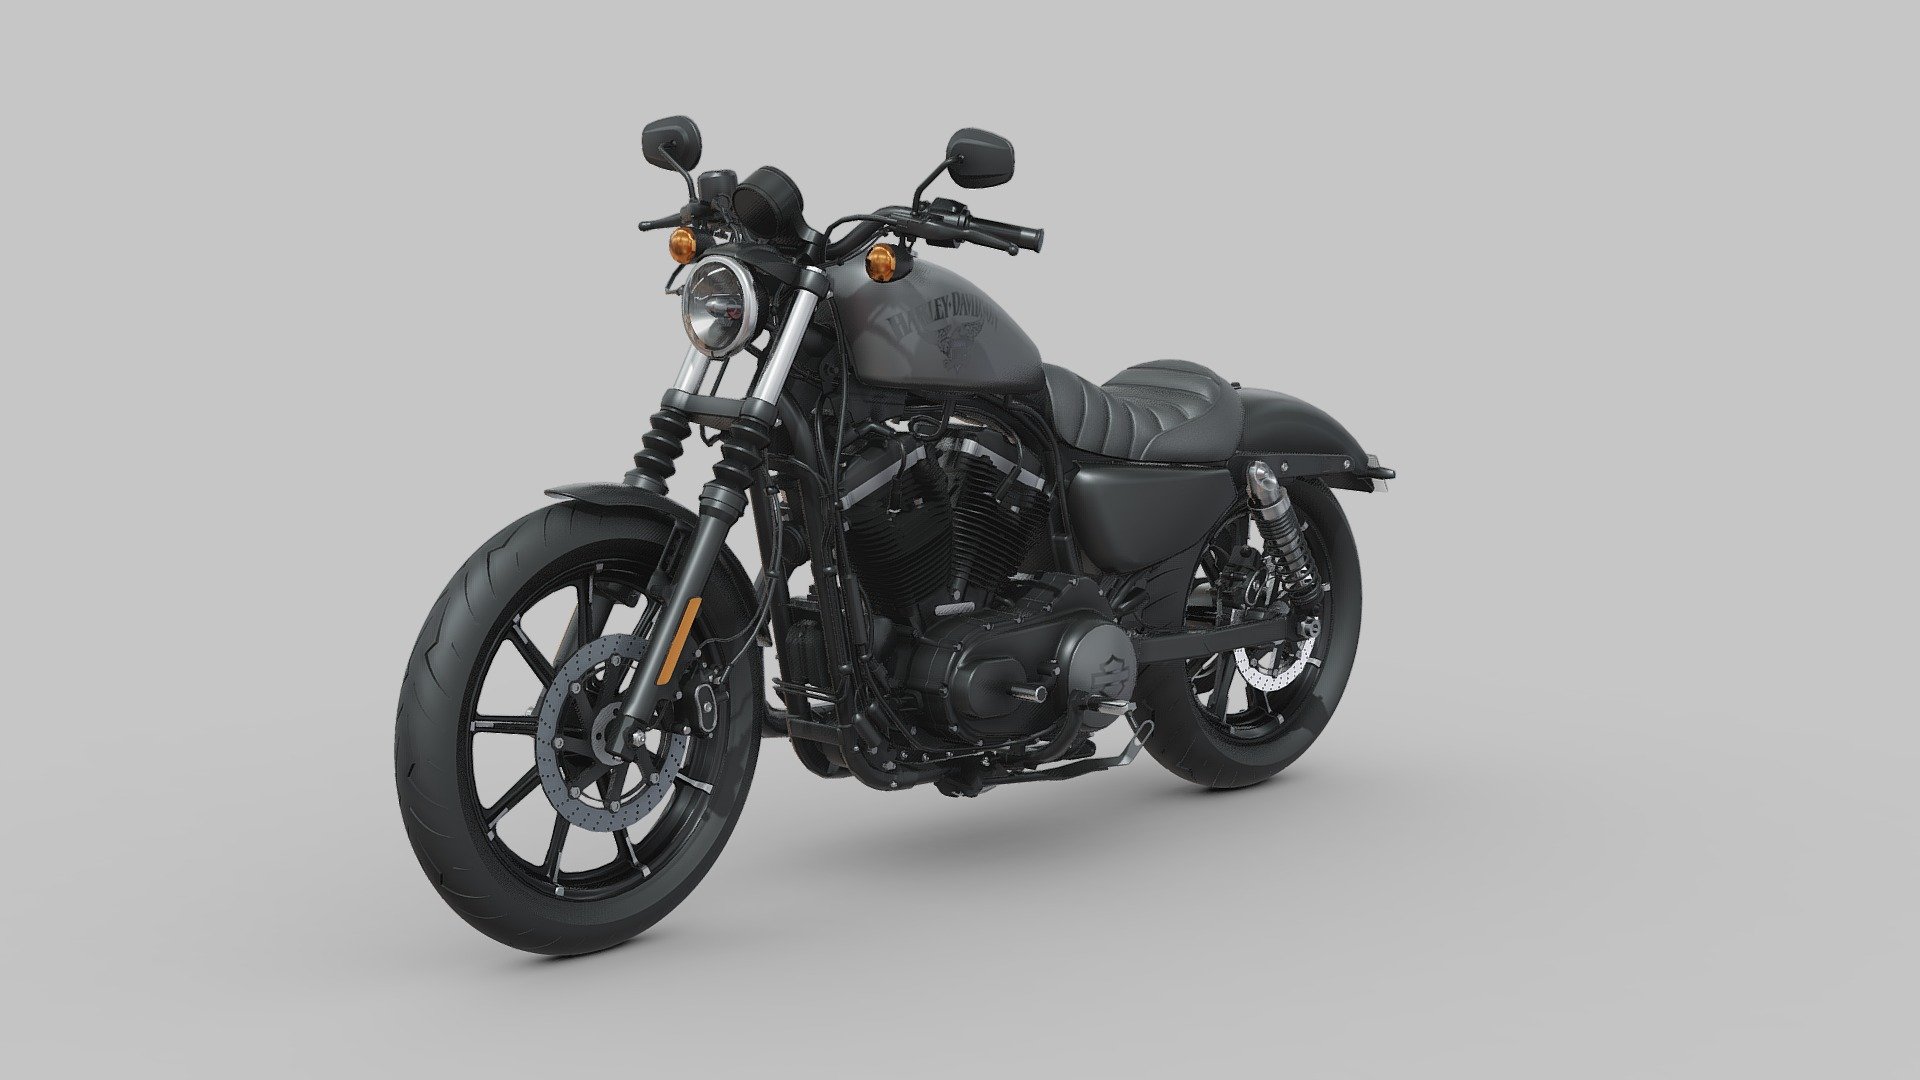 The Harley-Davidson Iron 883 is a raw and rugged cruiser motorcycle that embodies the essence of the iconic American brand. With its minimalist design and unmistakable Harley-Davidson DNA, the Iron 883 offers riders a timeless blend of style, performance, and attitude. Powered by a punchy 883cc Evolution engine, the Iron 883 delivers ample torque and responsive power, making it a thrilling ride on both city streets and open highways. Its blacked-out finishes, including the engine, exhaust, and wheels, give the bike a distinct and aggressive look that commands attention wherever it goes. Equipped with modern features such as optional ABS brakes and Harley-Davidson's signature sound, the Iron 883 offers a visceral and authentic riding experience that appeals to both seasoned riders and newcomers alike. With its timeless design and legendary heritage, the Harley-Davidson Iron 883 captures the essence of freedom on two wheels 3d model